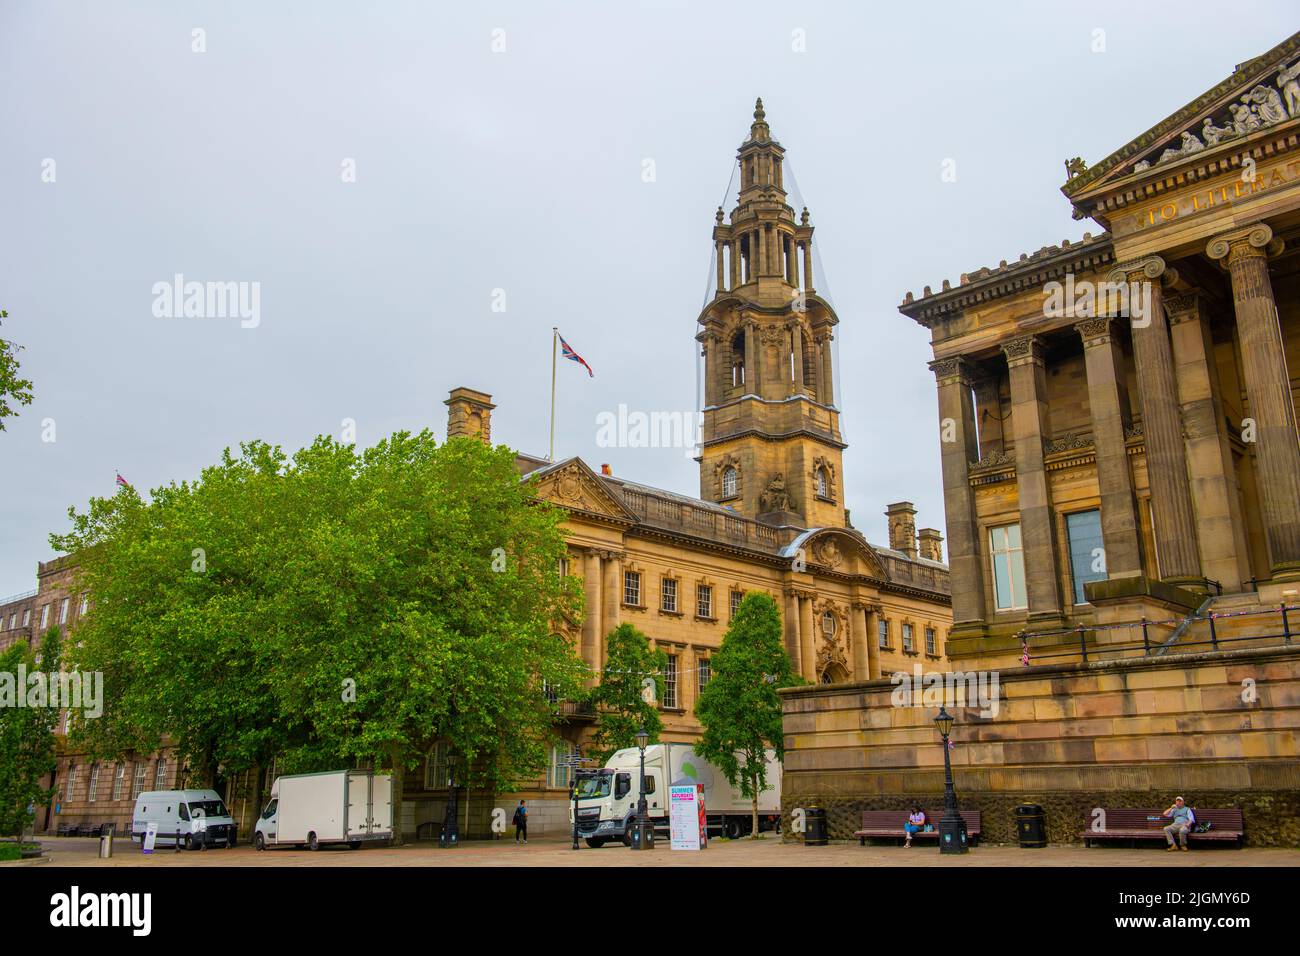 Sessions House is a courthouse on Harris Street at Preston Flag Market in historic city centre of Preston, Lancashire, UK. Stock Photo